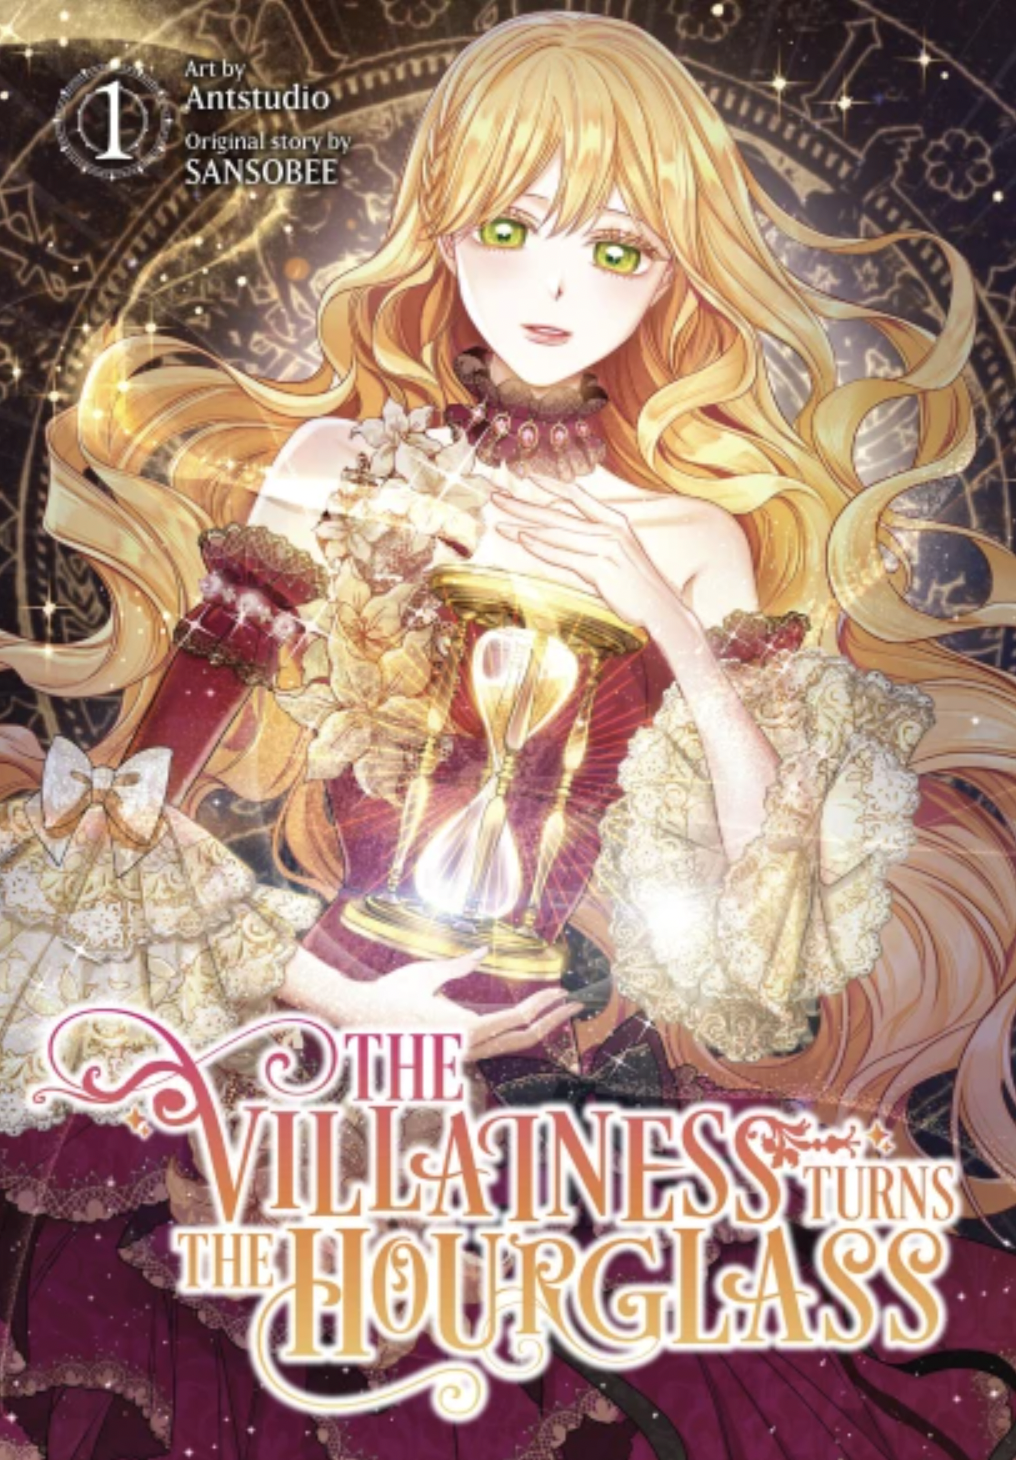 The Villainess Turns the Hourglass involves a rather methodical manhwa where the heroine Aria is working to slowly get revenge.